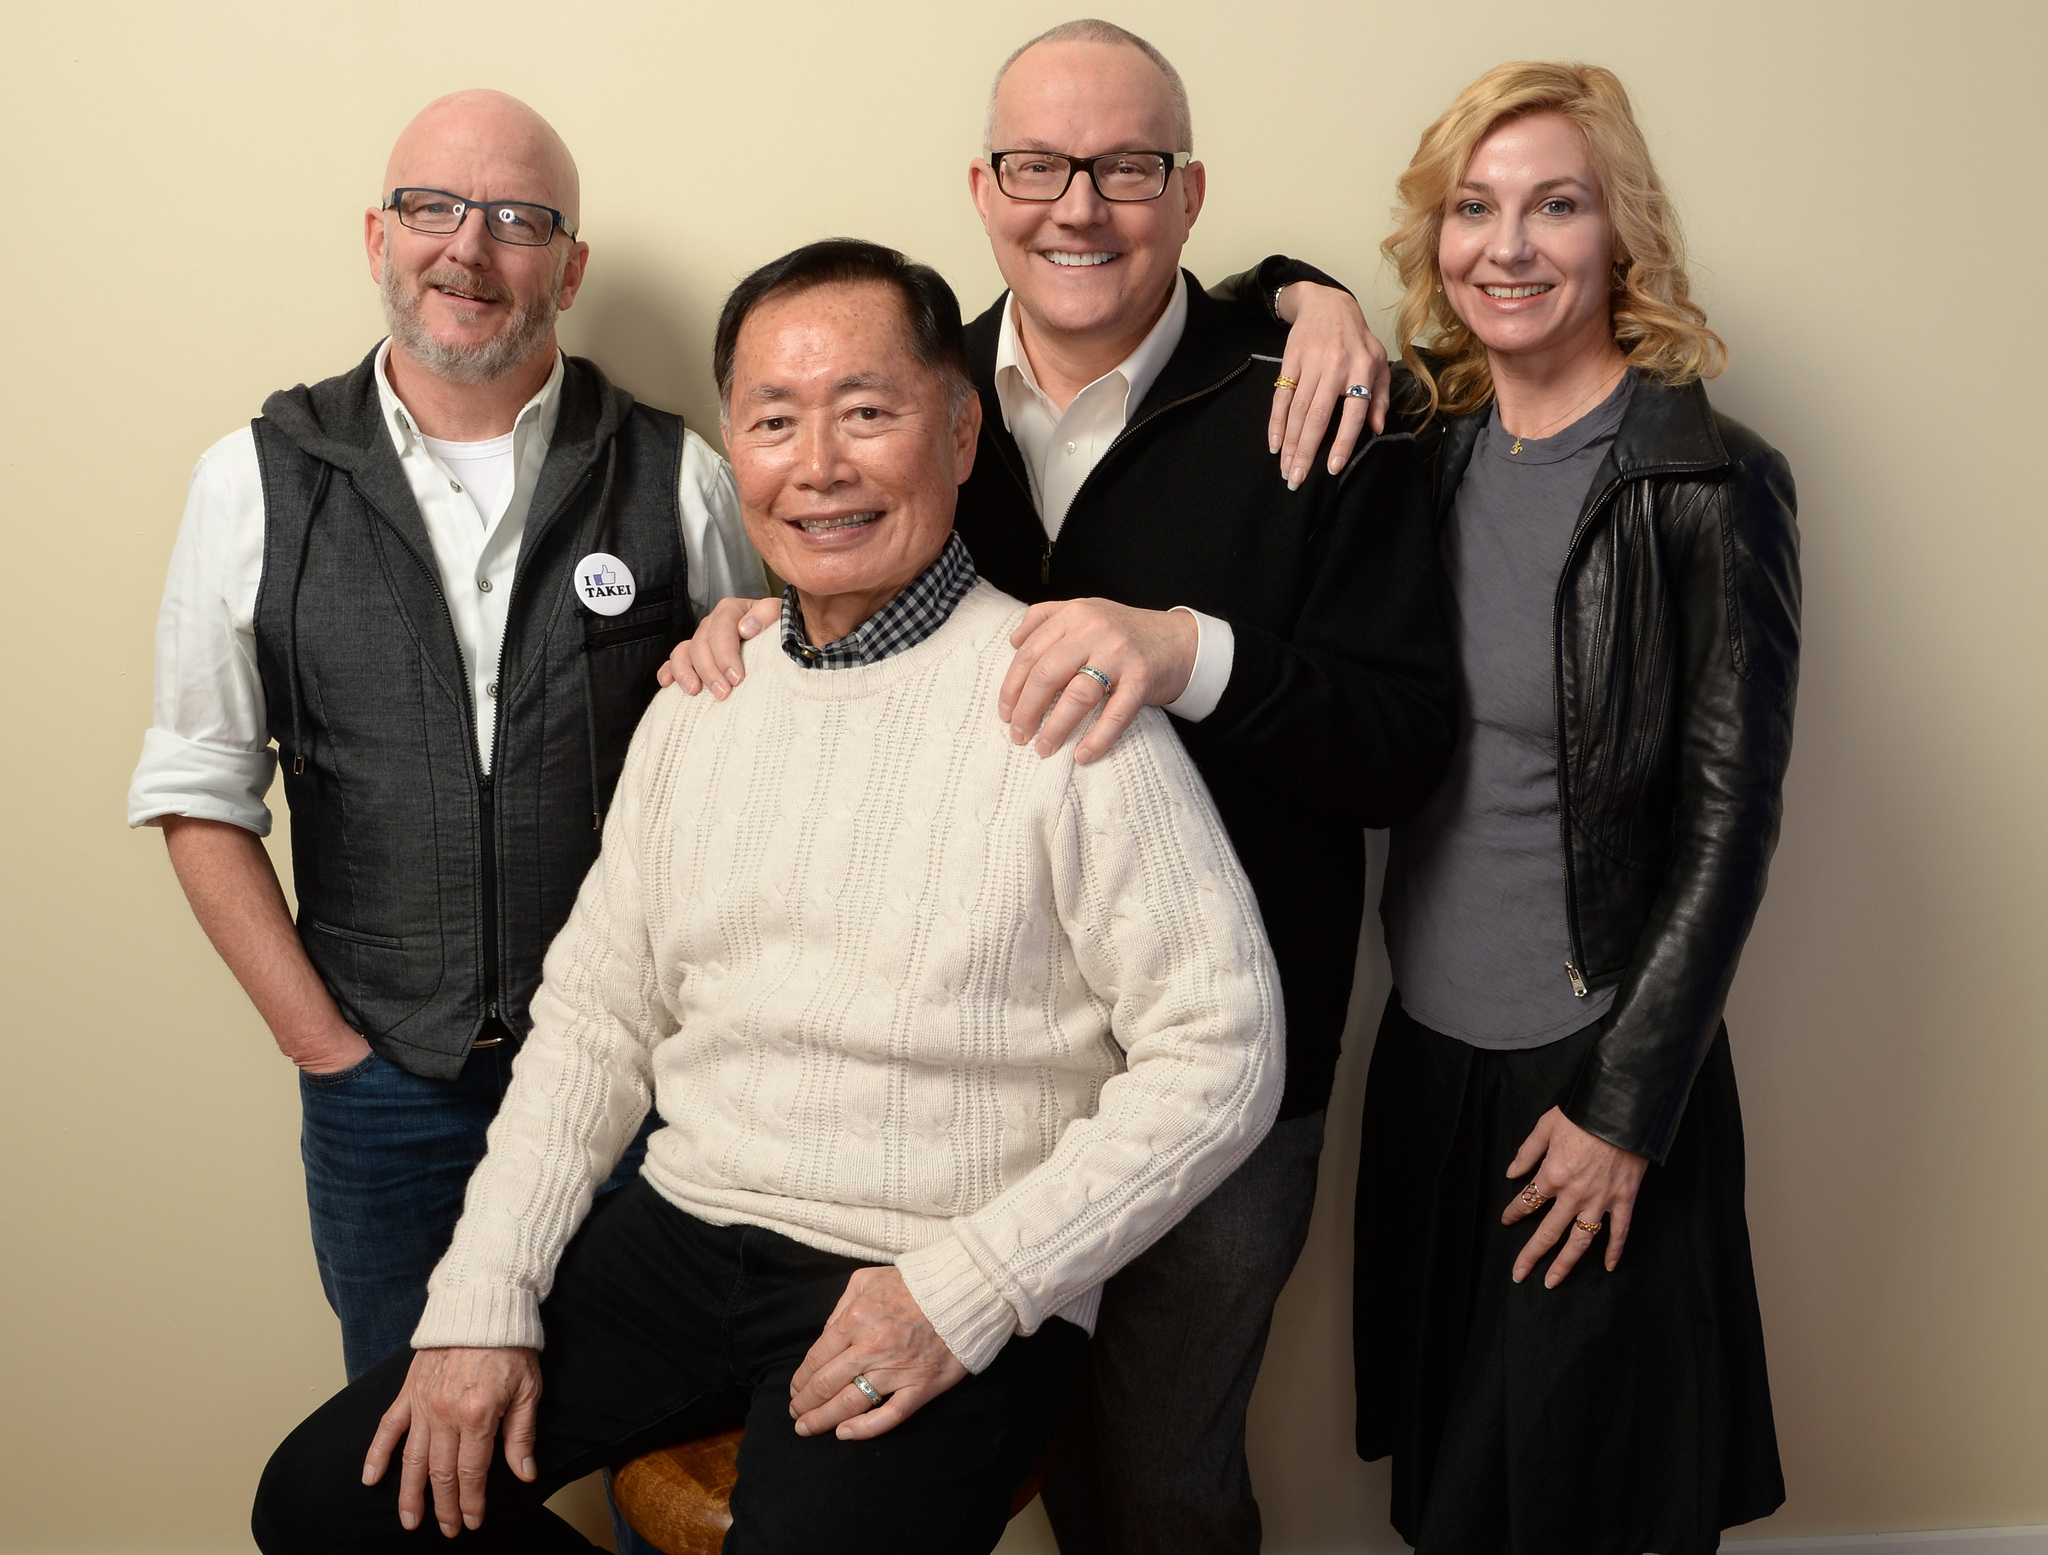 George Takei, Jennifer M. Kroot, Bill Weber and Brad Takei at event of To Be Takei (2014)